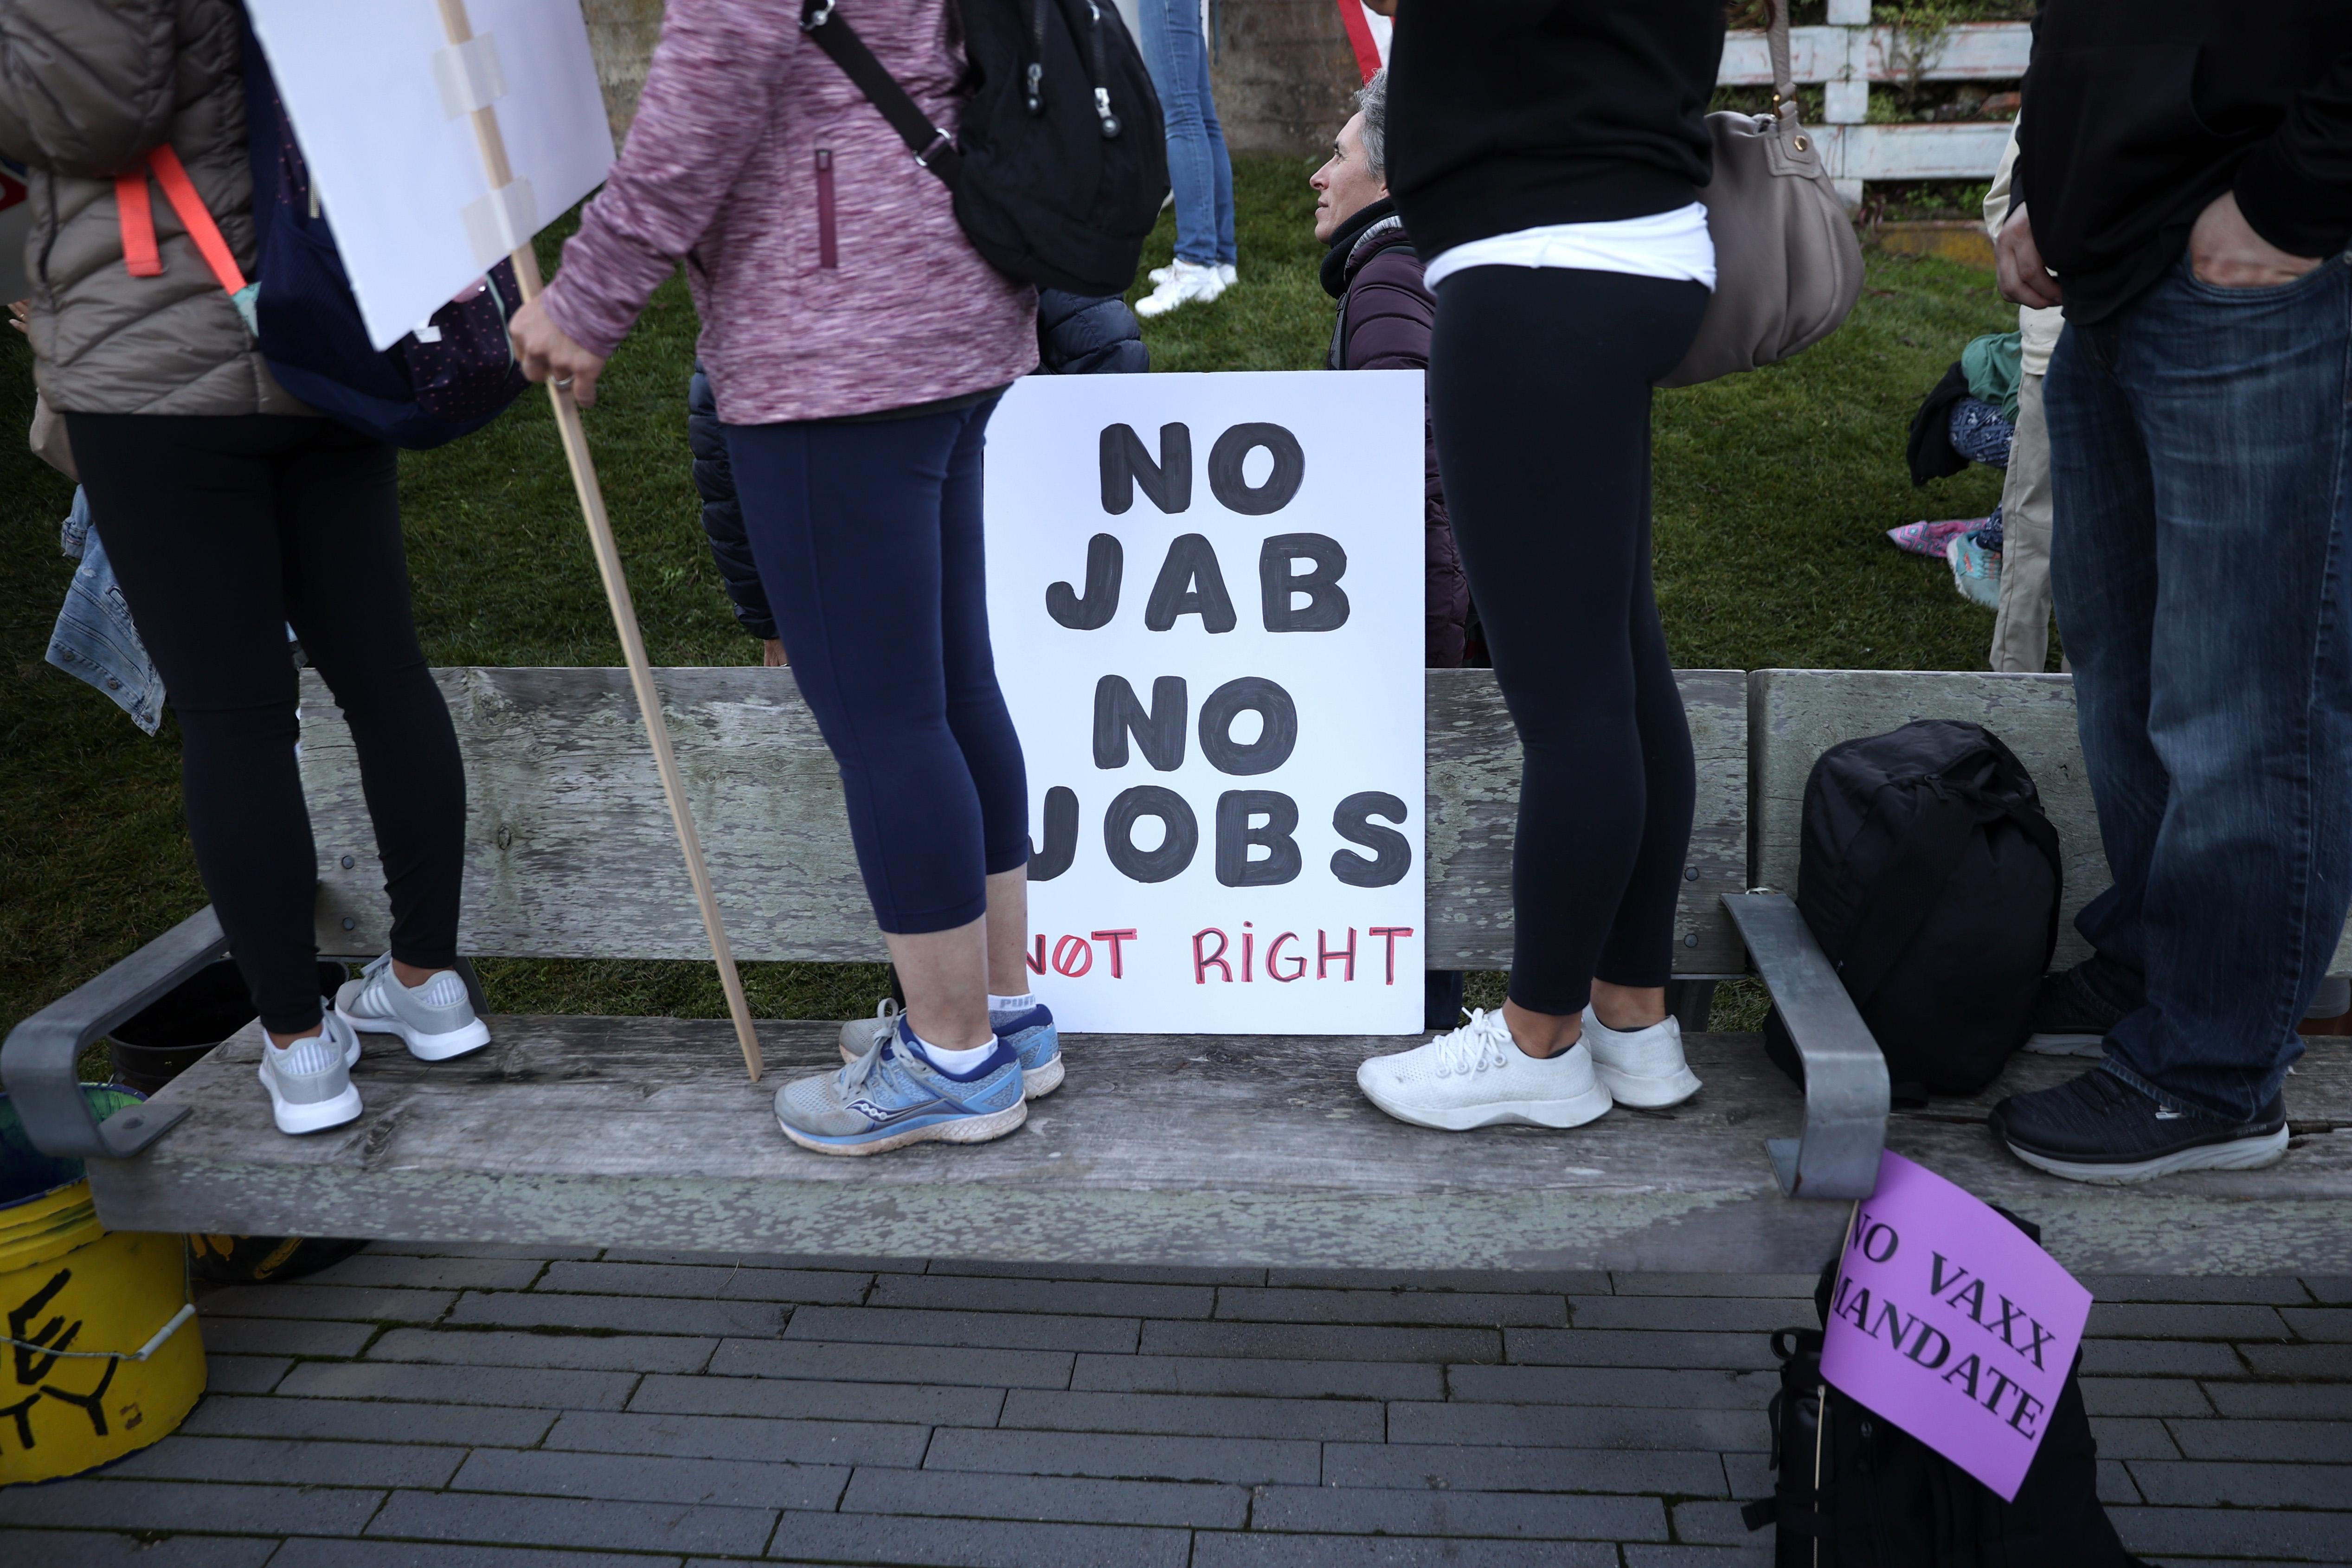 Protesters stand next to a sign during an anti-vaccination rally at the Golden Gate Bridge on November 11, 2021 in San Francisco, California.